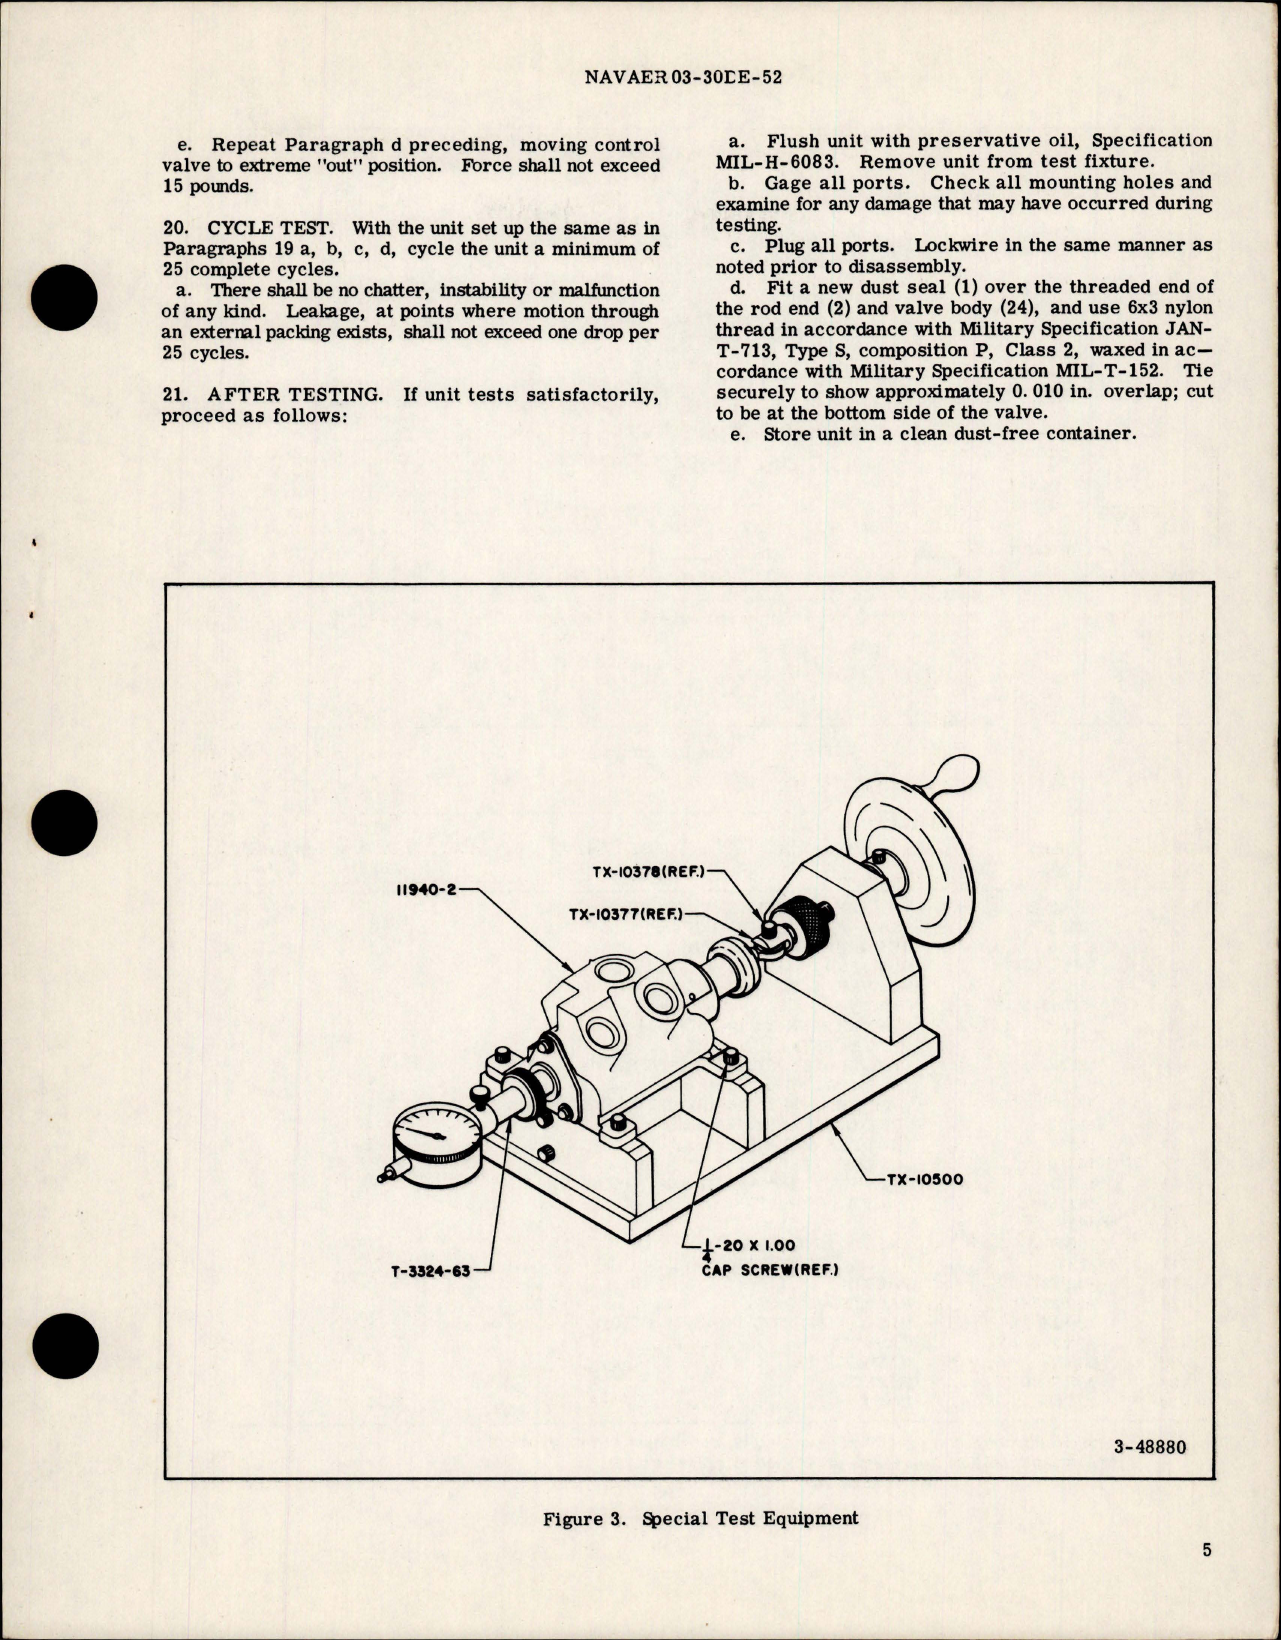 Sample page 5 from AirCorps Library document: Overhaul Instructions with Parts Breakdown for Hydraulic Servo Control Valve - Part 11940-2